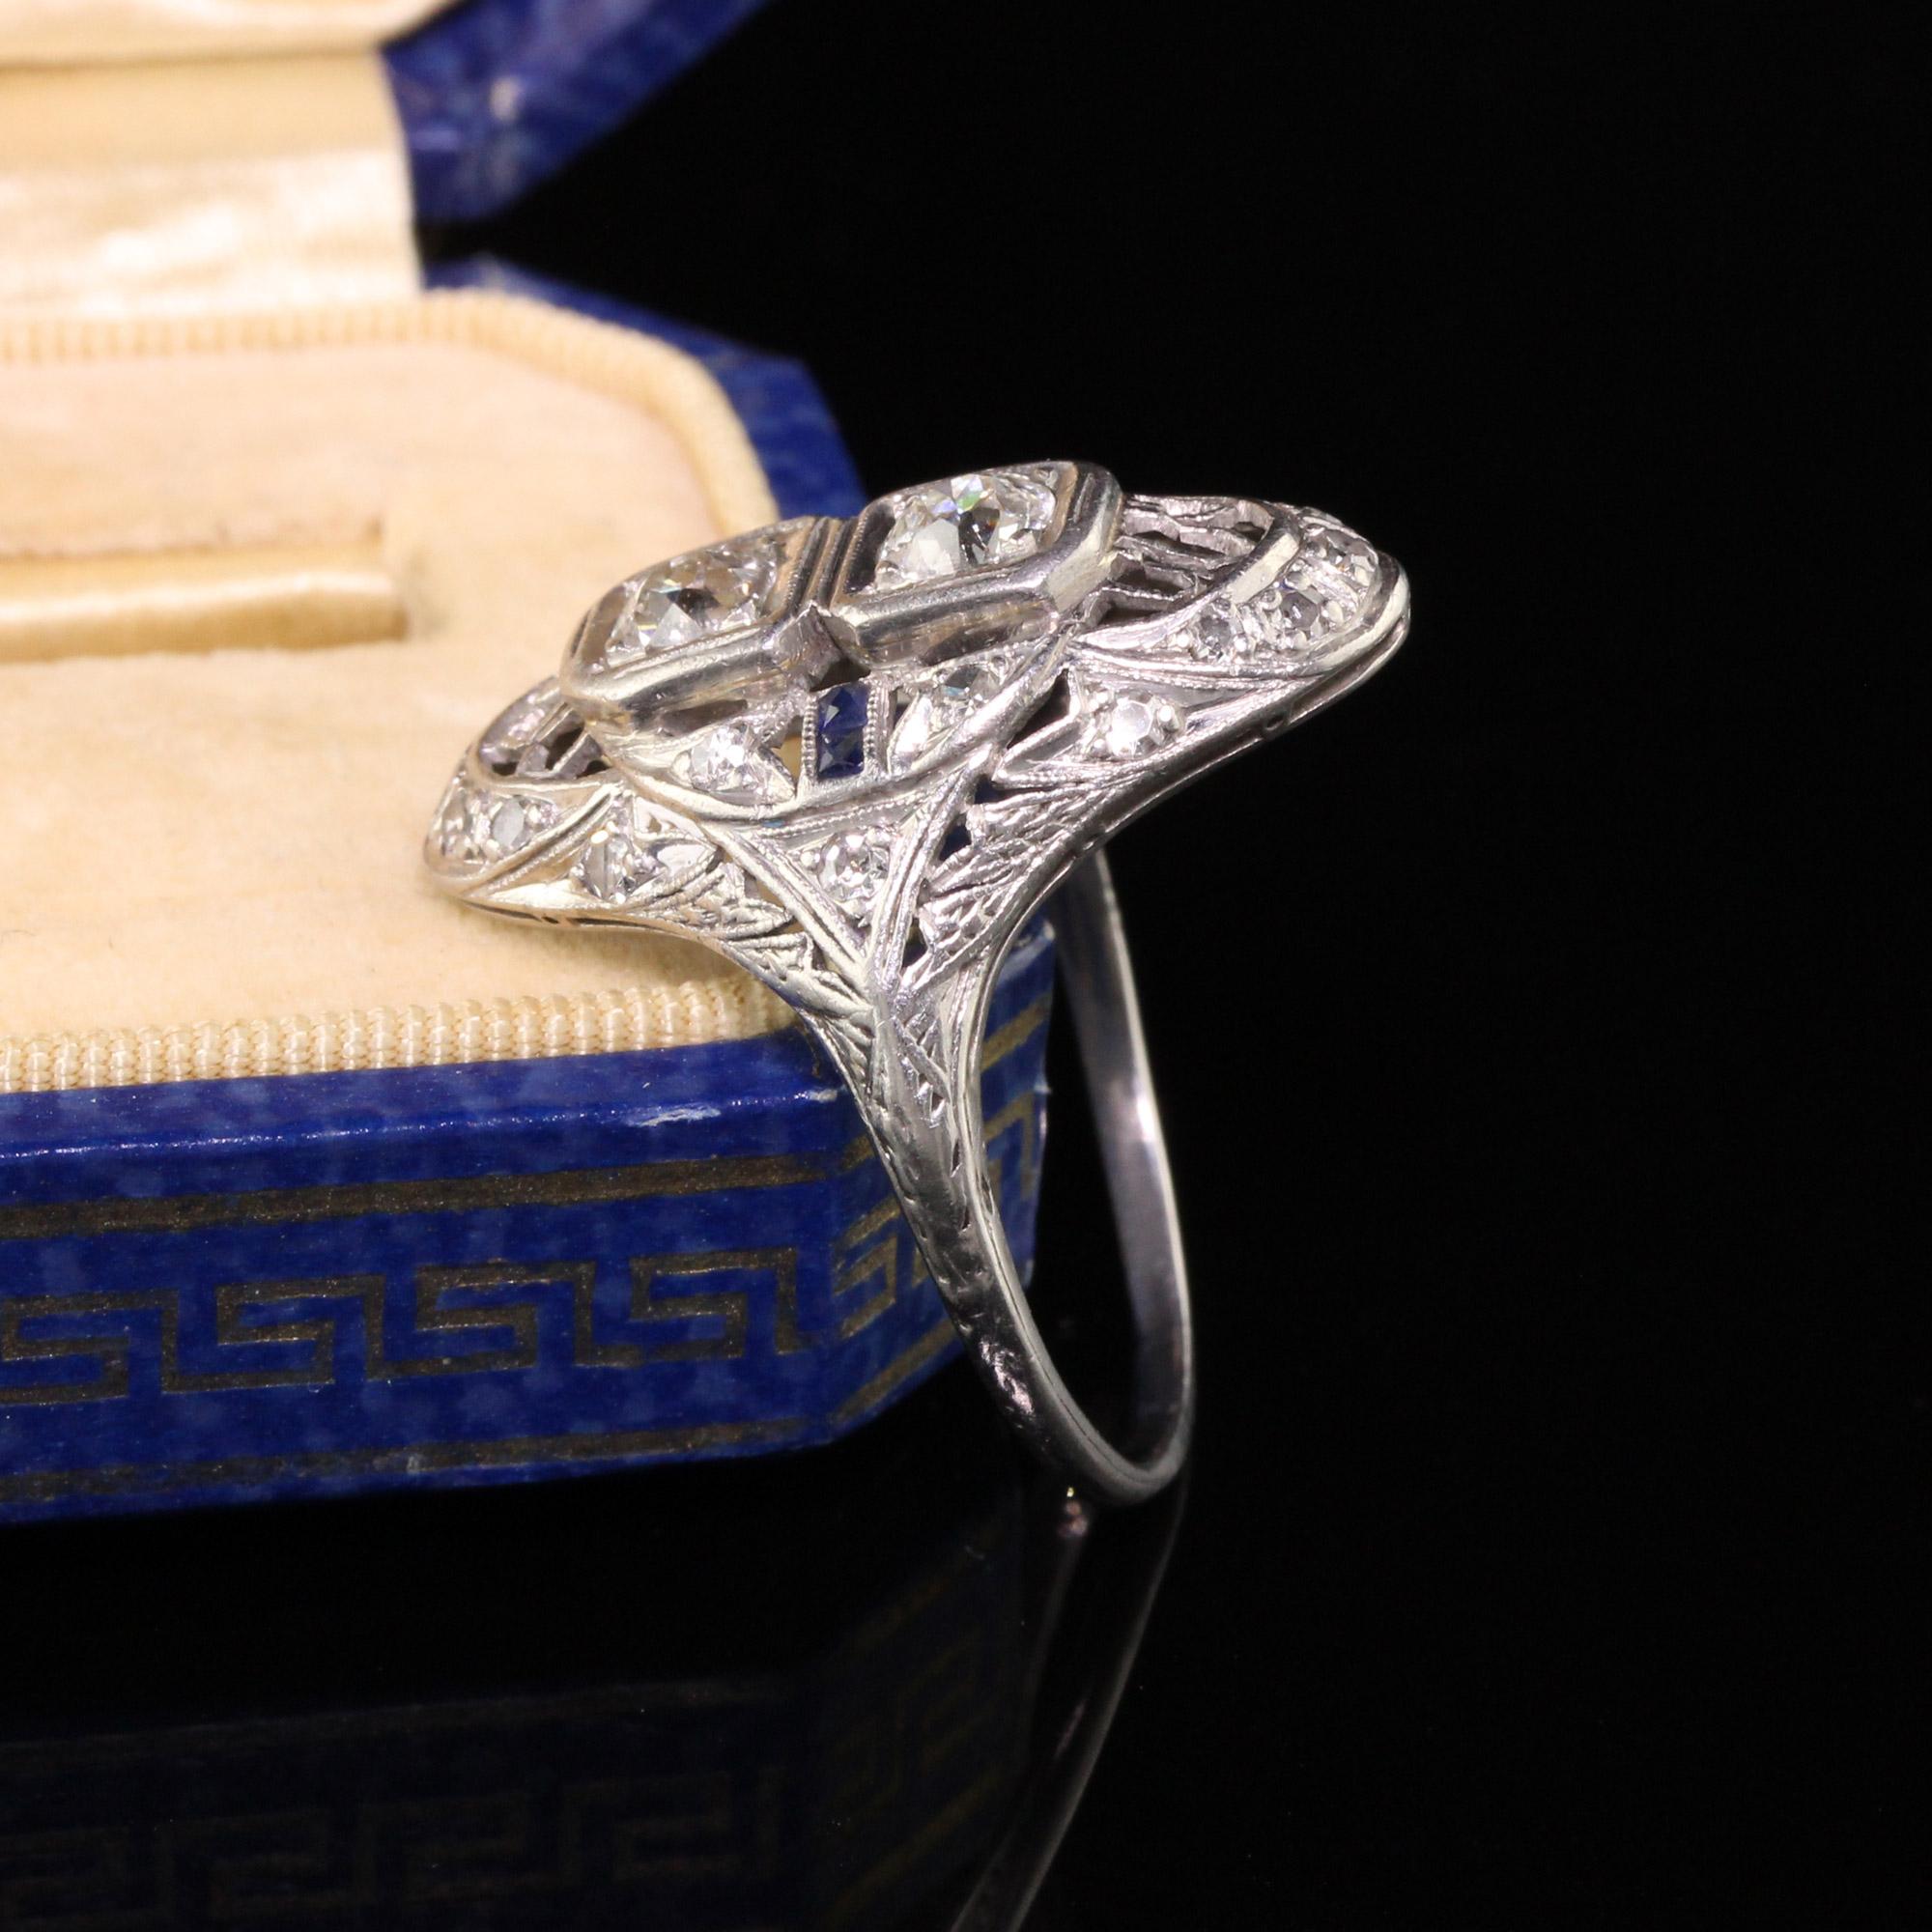 A gorgeous Antique Art Deco Platinum Diamond and Sapphire Filigree Shield Ring that features two beautiful old european cut diamonds set in a intricate platinum filigree mountings with sapphire accents.

Item #R0587

Metal: Platinum

Weight: 6.7